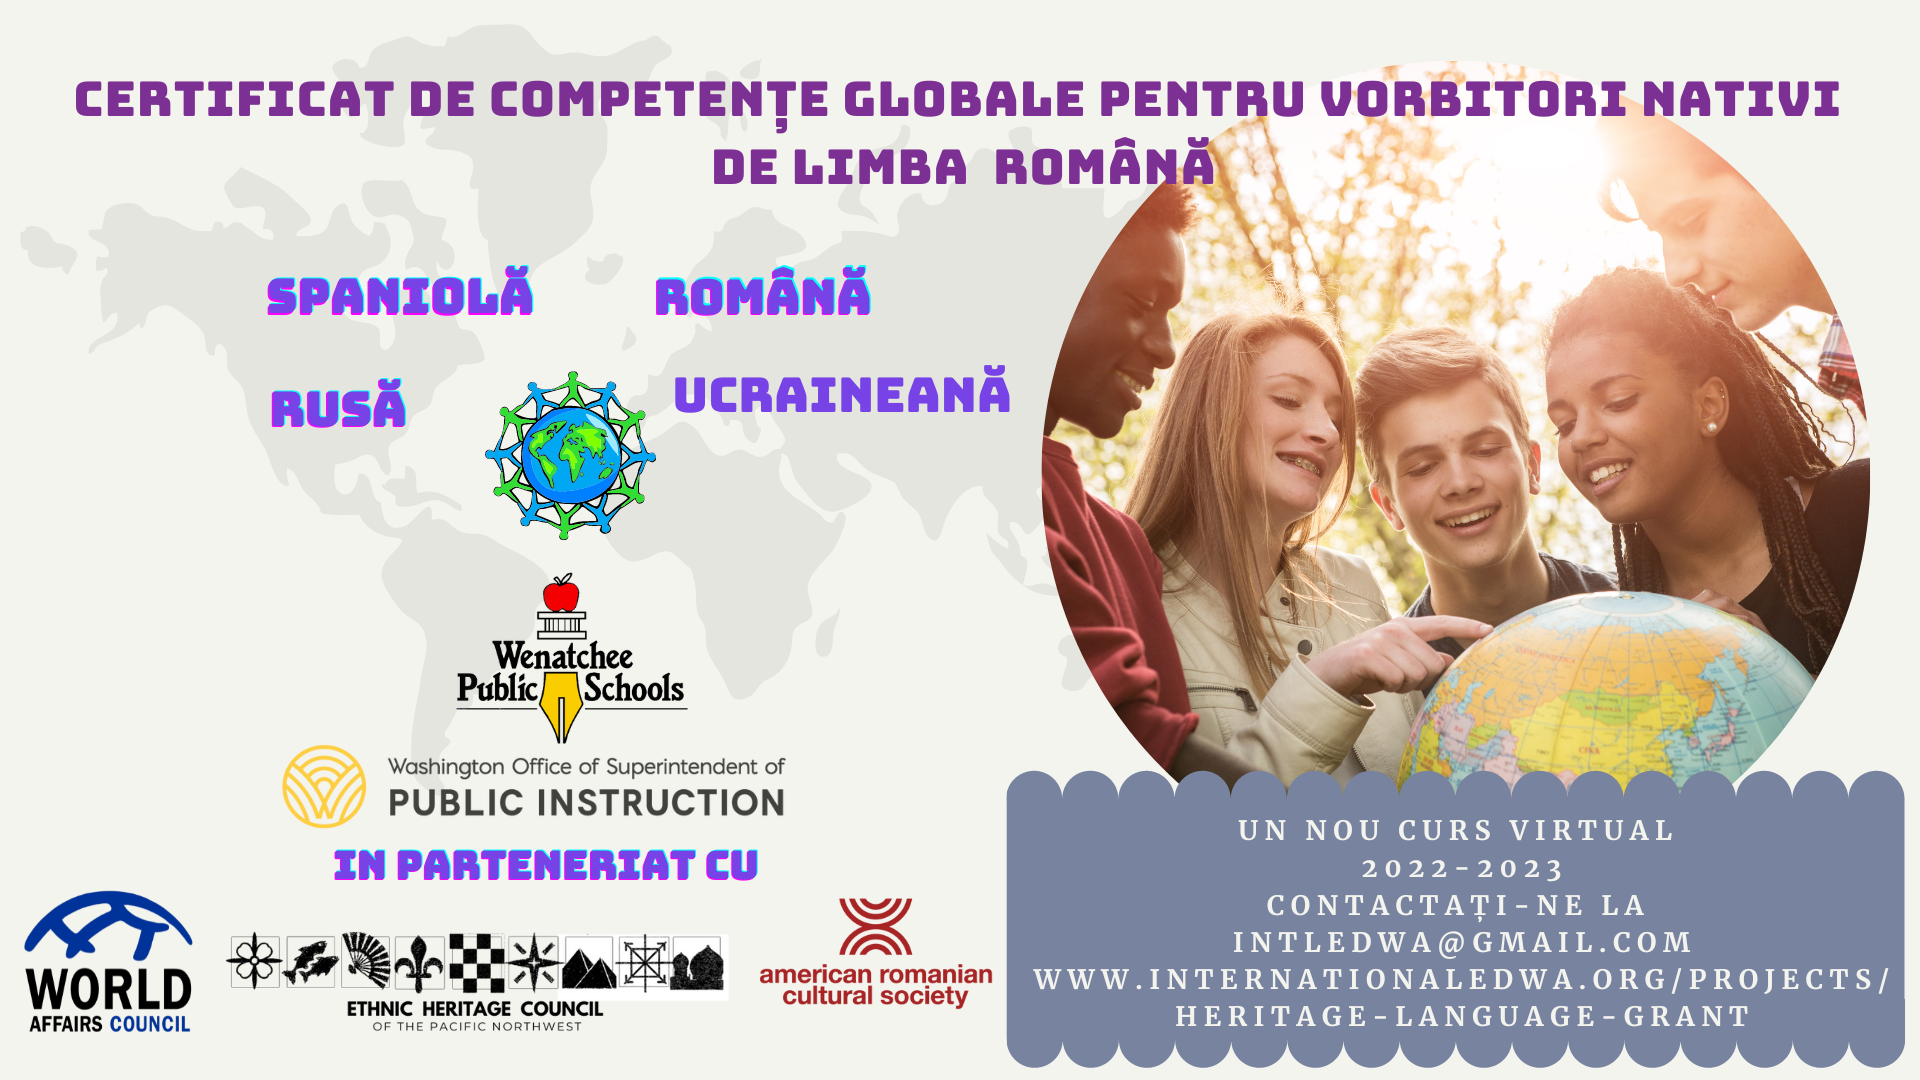 Global Competence Certificate for Romanian Heritage Speakers